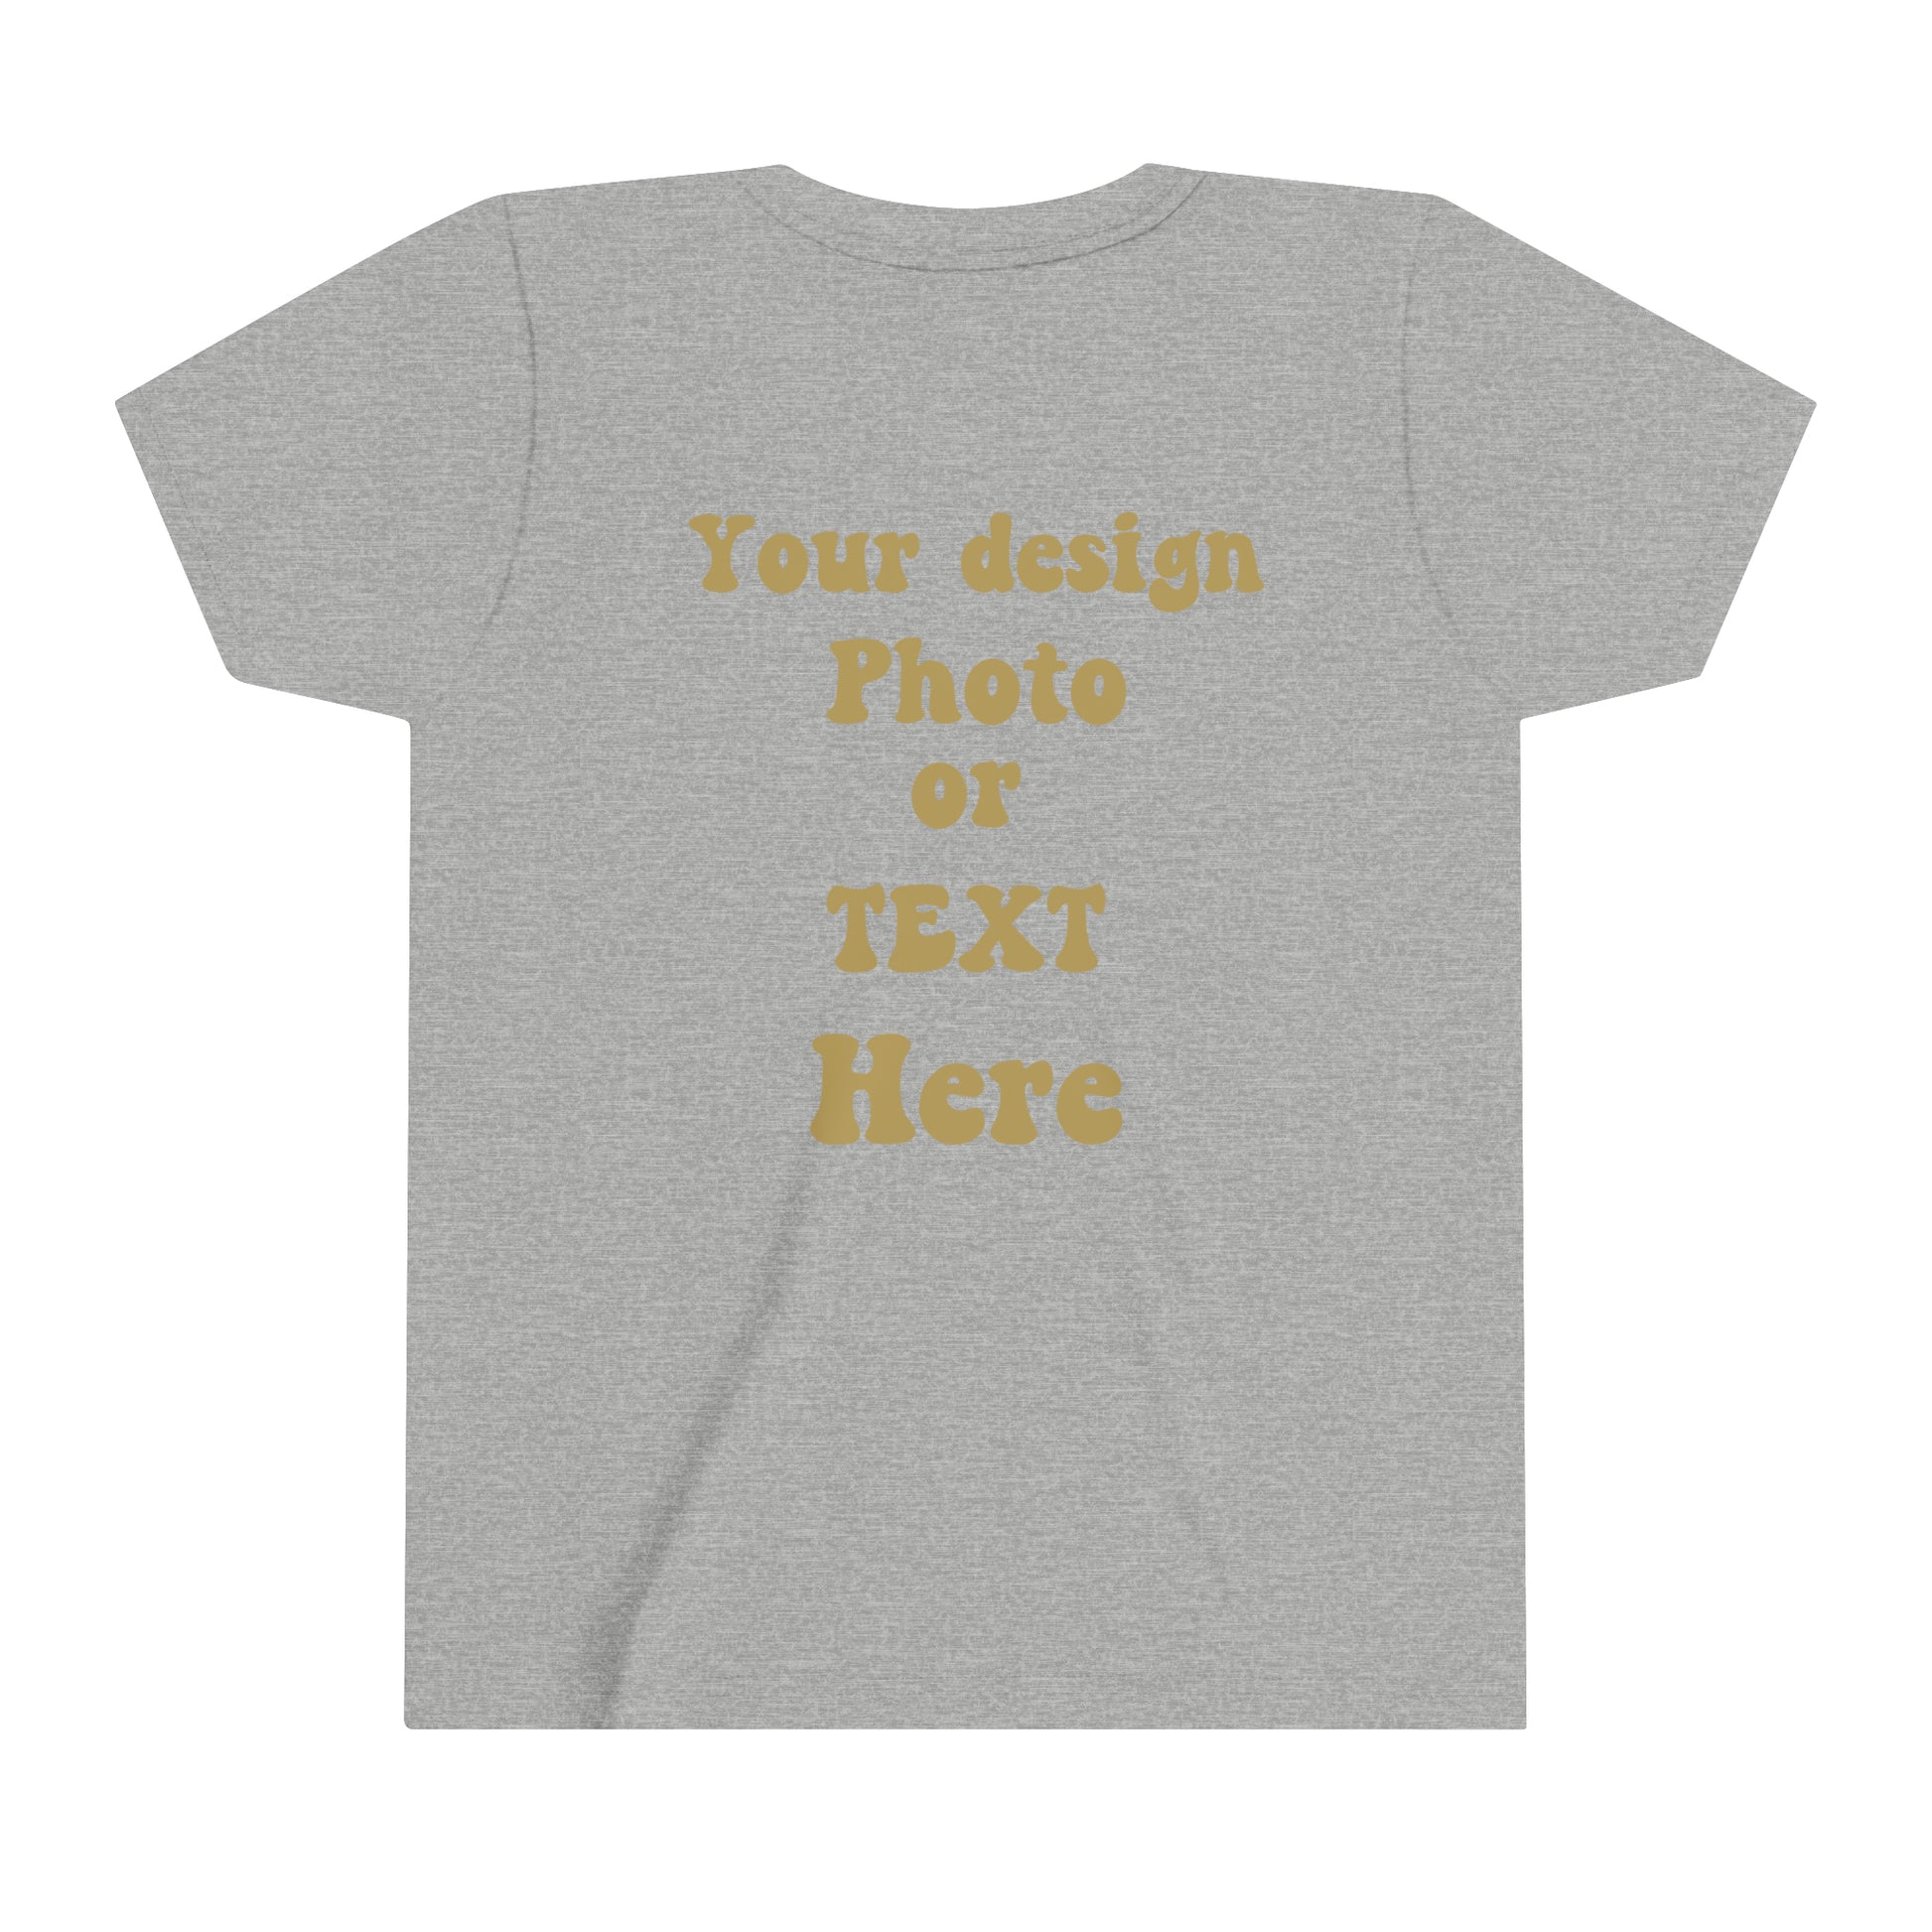 Youth Short Sleeve Tee - Personalized with Your Photo, Text, and Design Kids clothes   